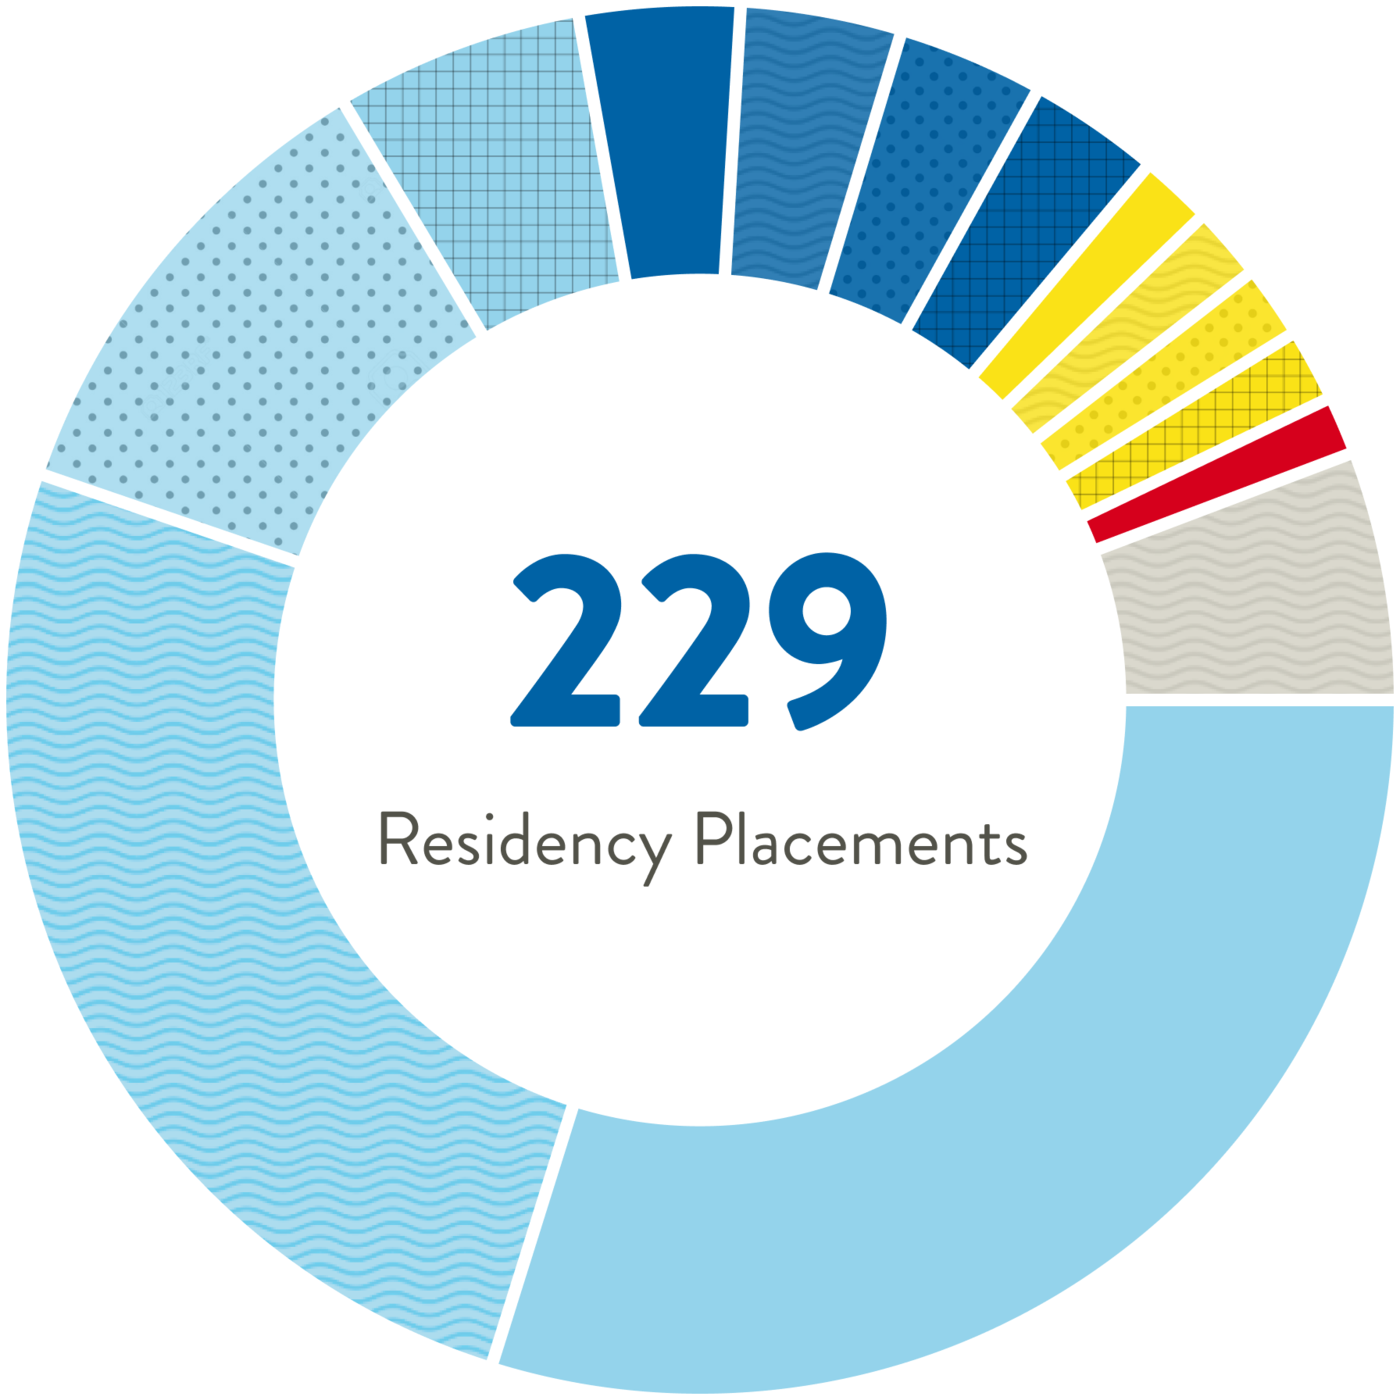 229 Residency Placements